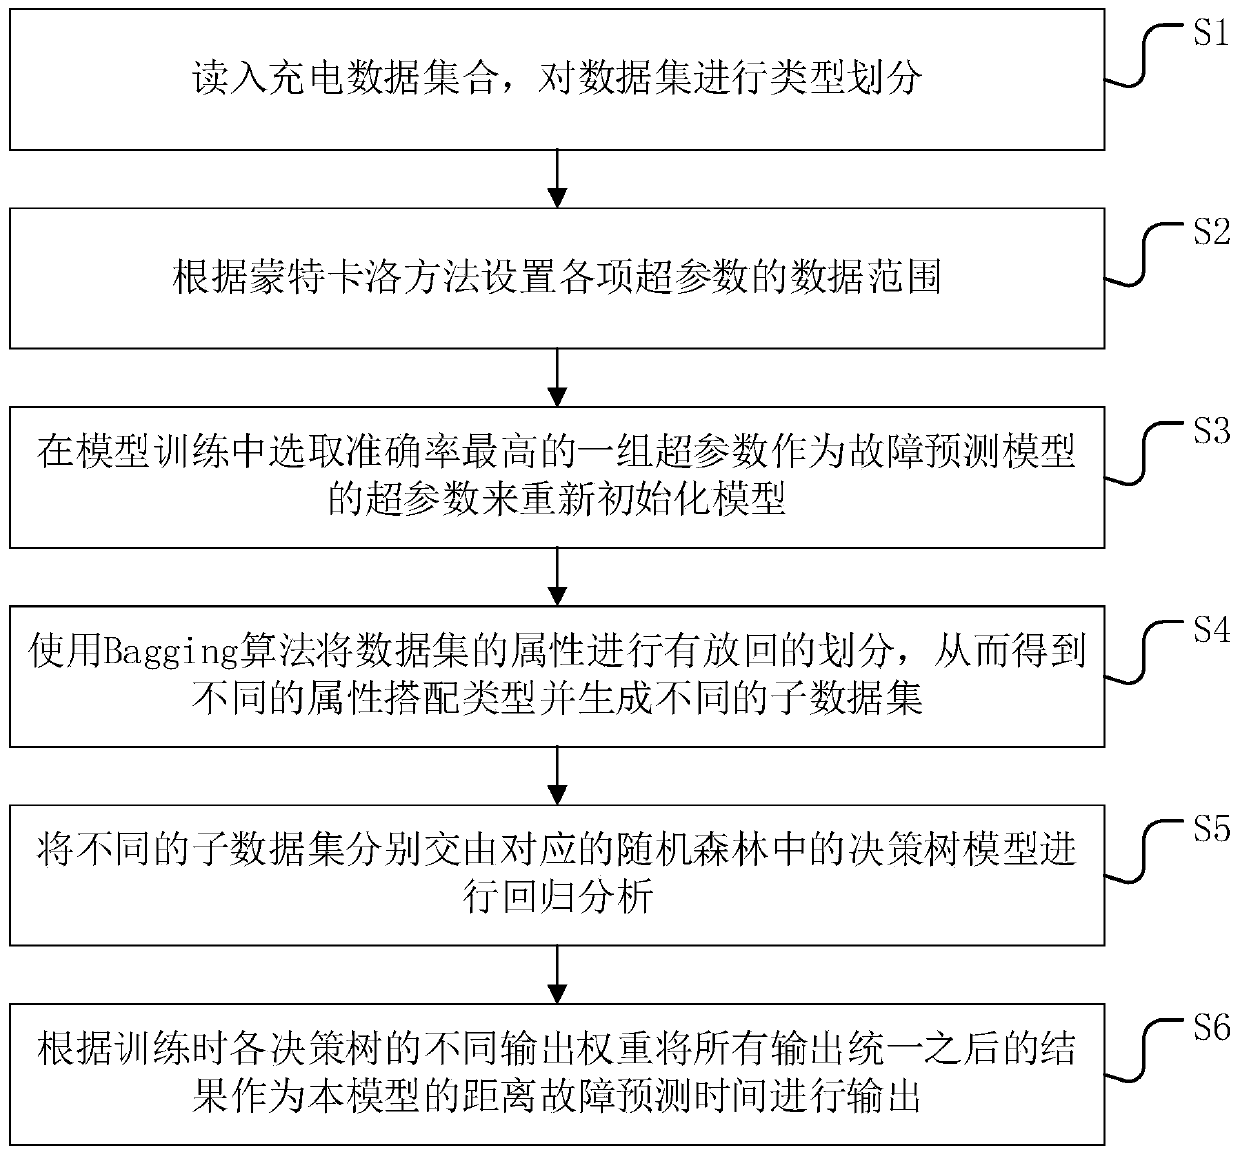 An electric vehicle charging facility fault prediction method and system